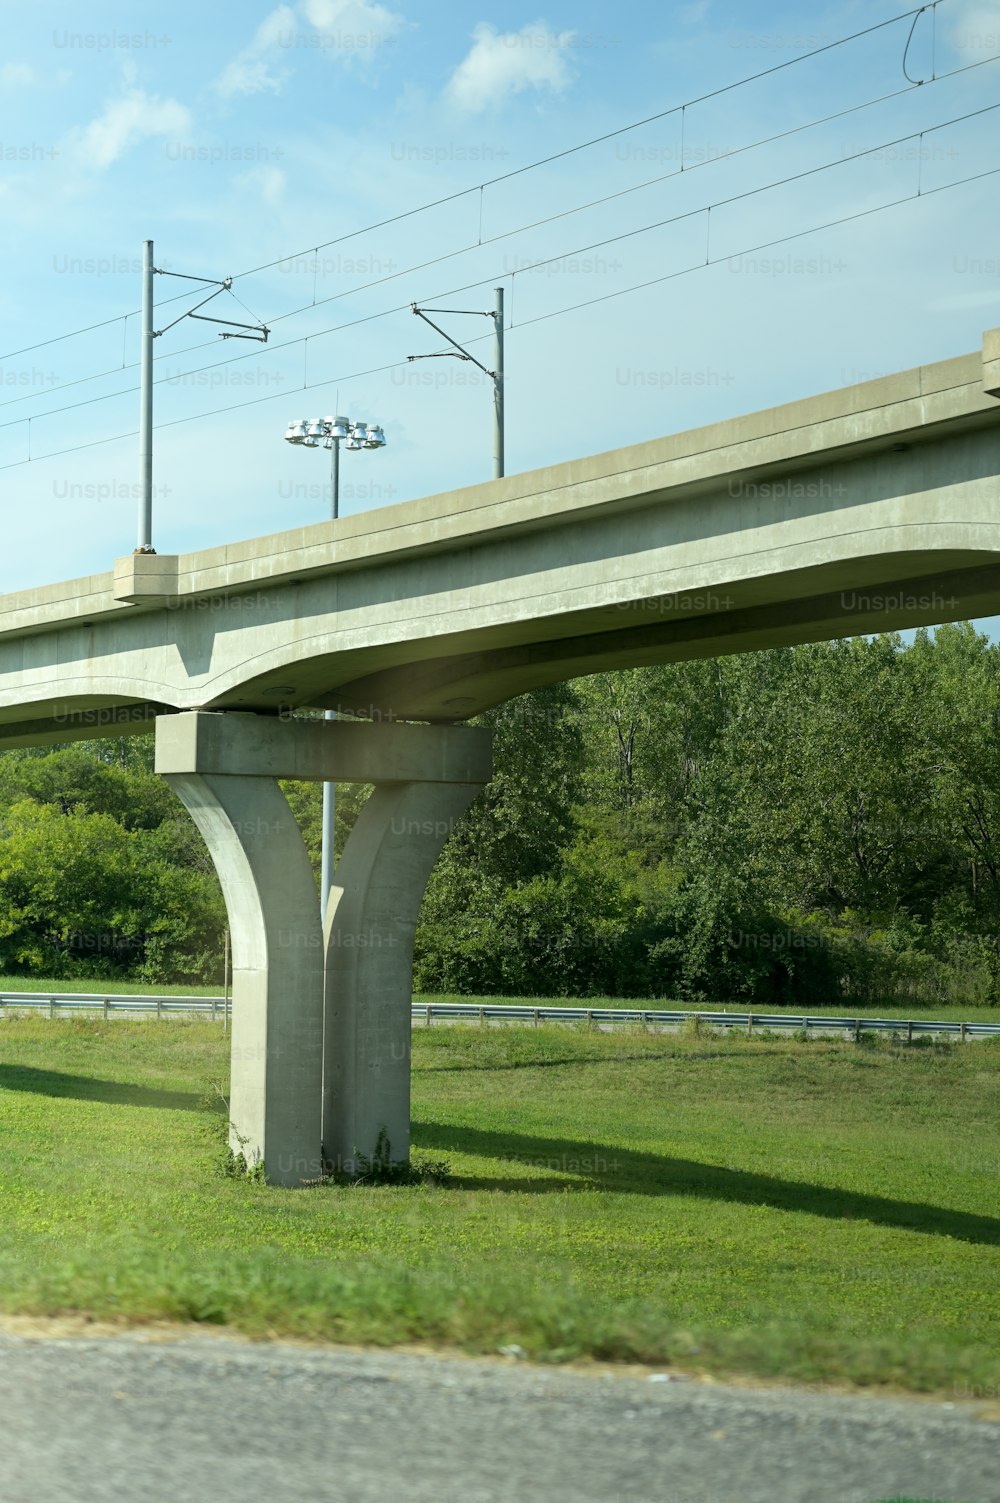 A Highway Overpass With Power Lines Above It Photo Transmission Line Image On Unsplash